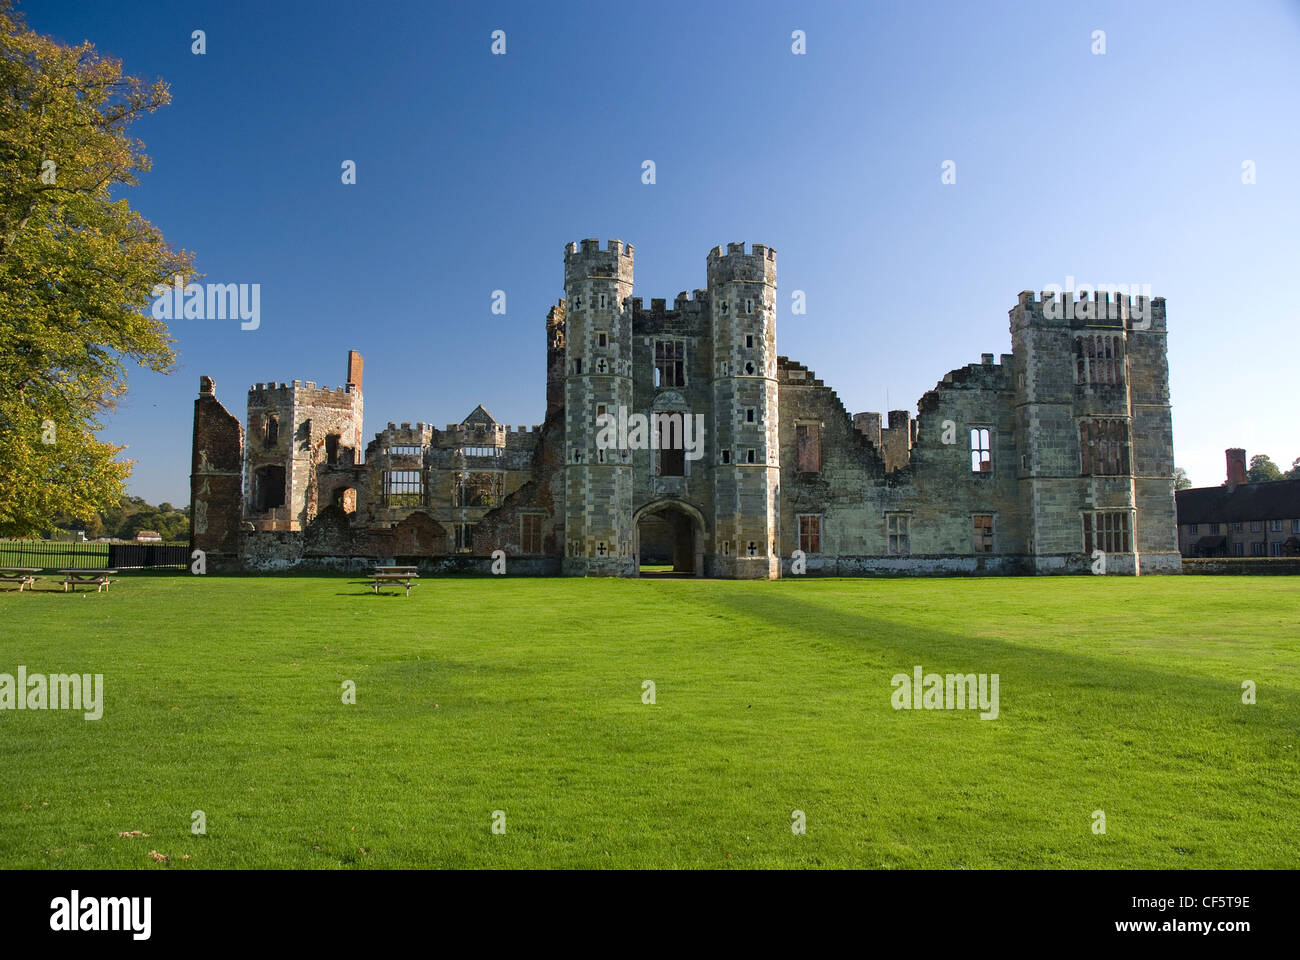 Cowdray Ruins, one of Southern England's most important early Tudor courtier's palaces set in the grounds of Cowdray Park. Stock Photo